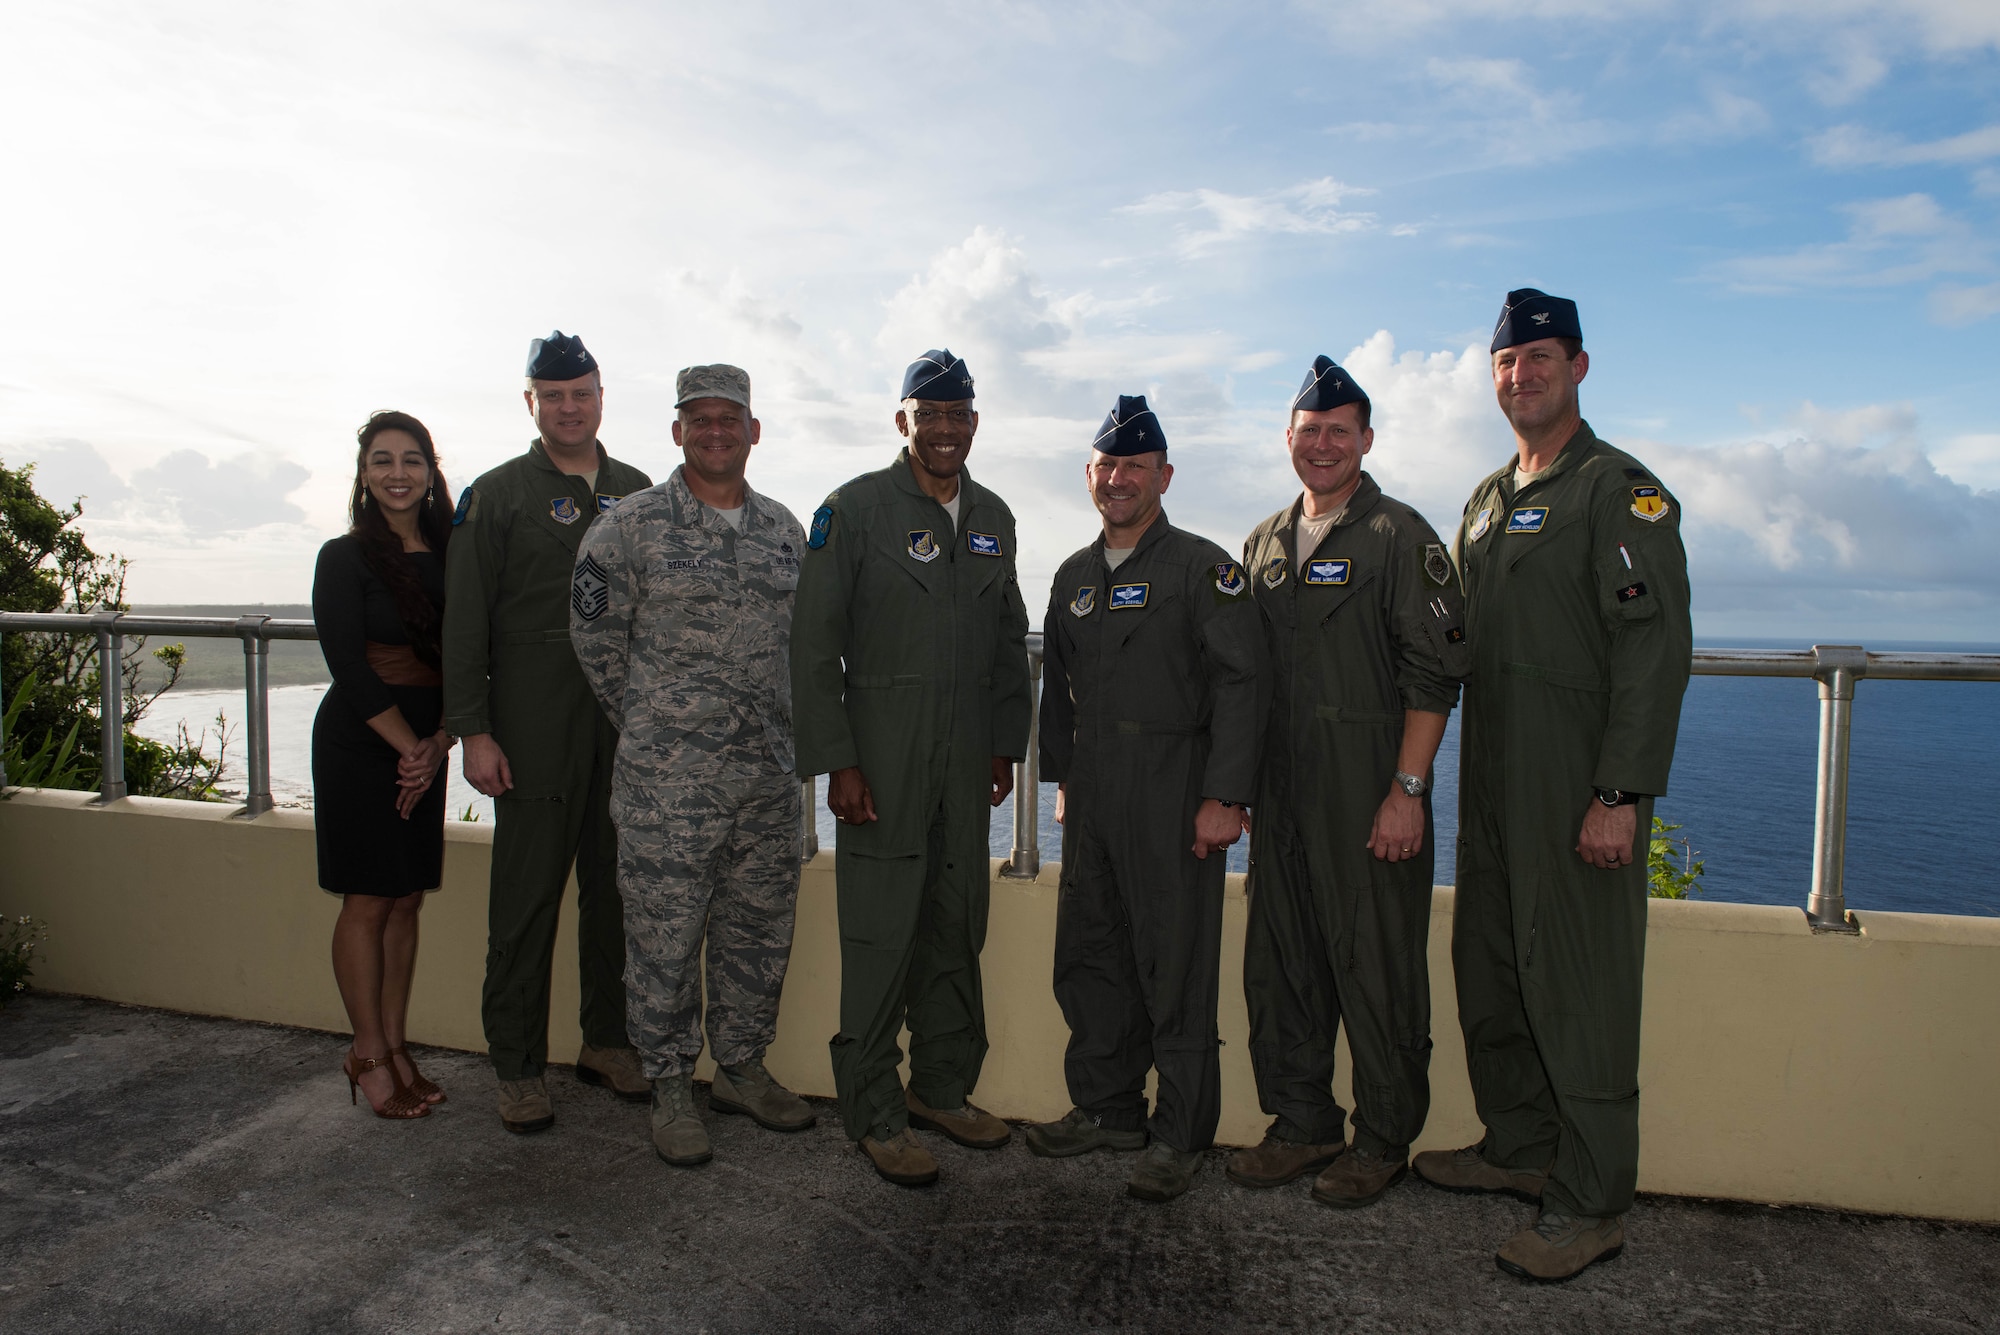 Gen. CQ Brown, Jr. (center), Pacific Air Forces commander, takes a photo with Brig. Gen. Gentry Boswell, 36th Wing commander, and members of his team during a brief tour of Anderson Air Force Base, Guam, Aug. 14, 2018. During the tour, Boswell highlighted the ongoing construction projects occurring throughout the base to enhance its role as a power projection platform. (U.S. Air Force photo by Staff Sgt. Hailey Haux)